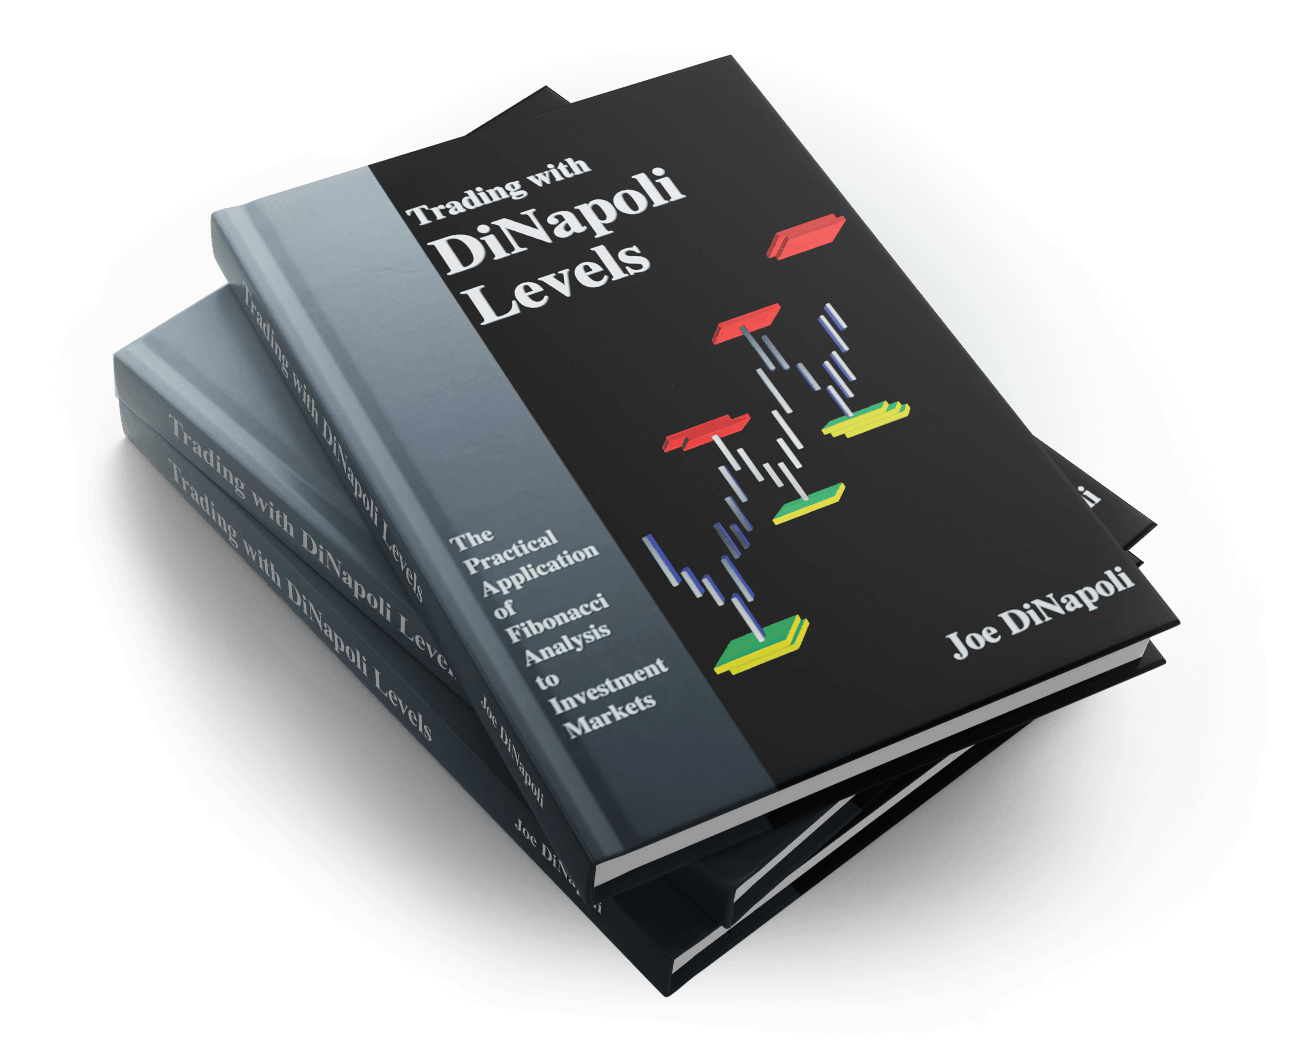 Trading with DiNapoli Levels book